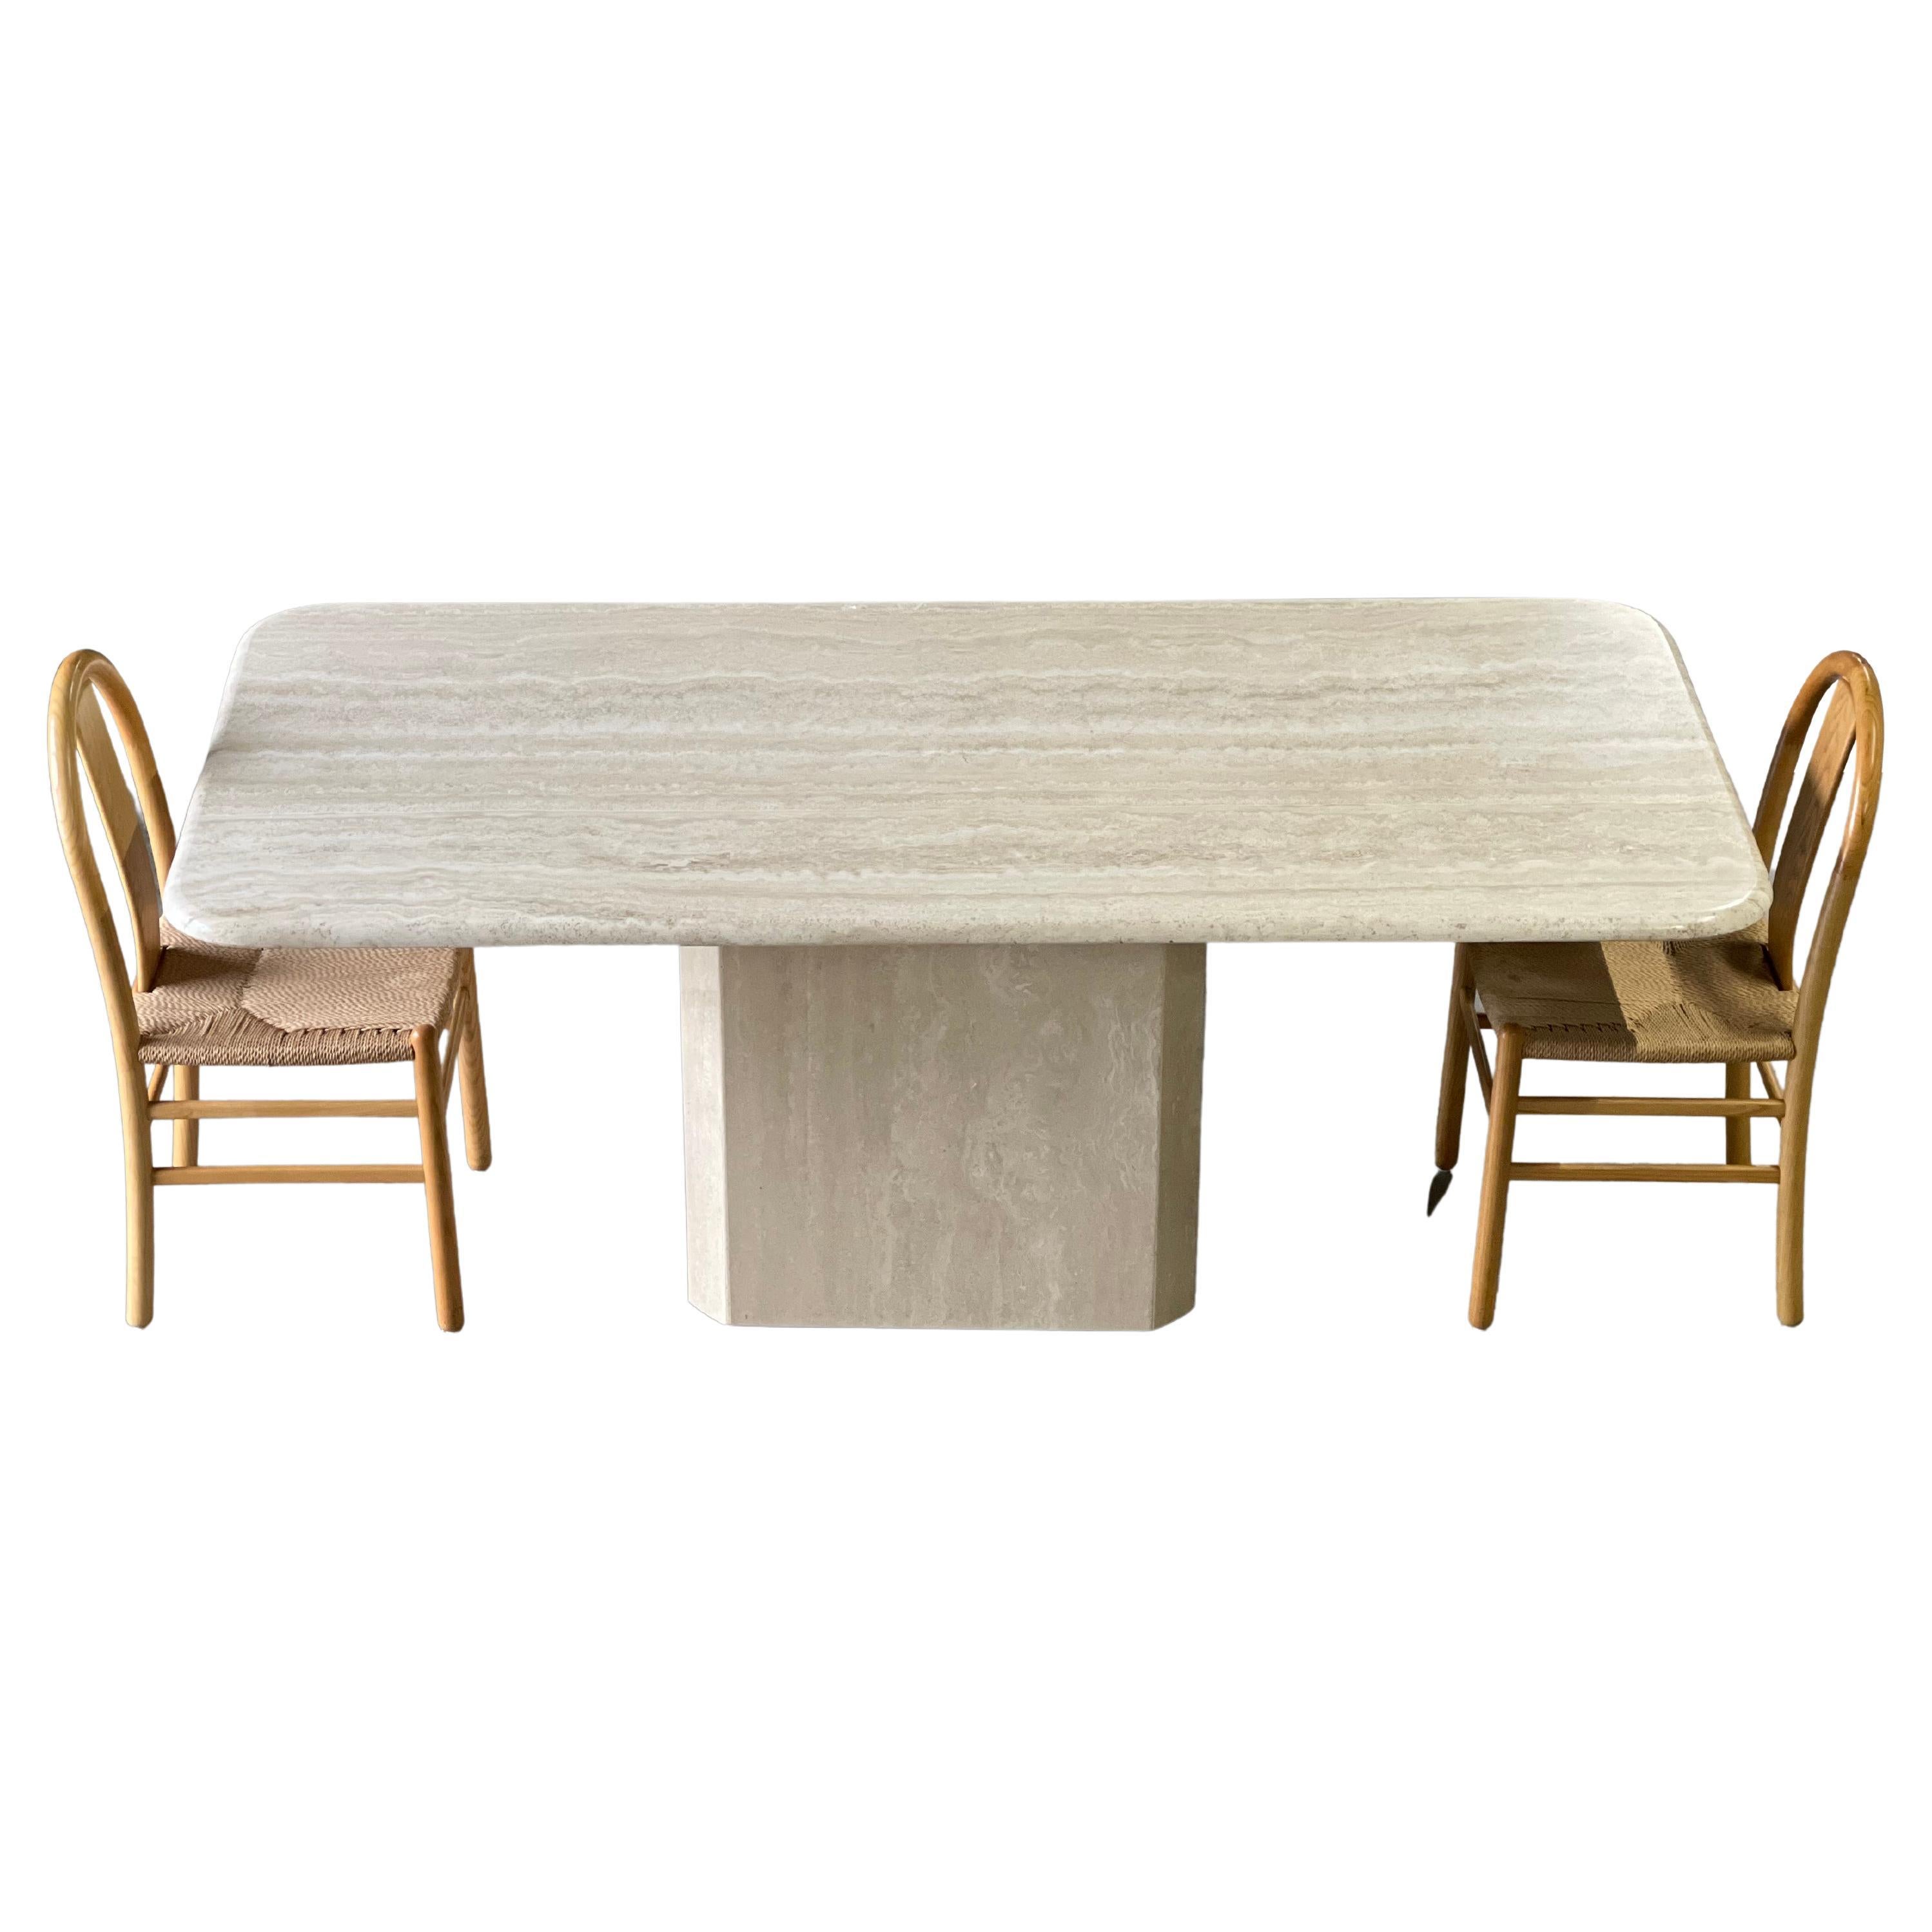 Vintage Italian Travertine Dining Table For Sale